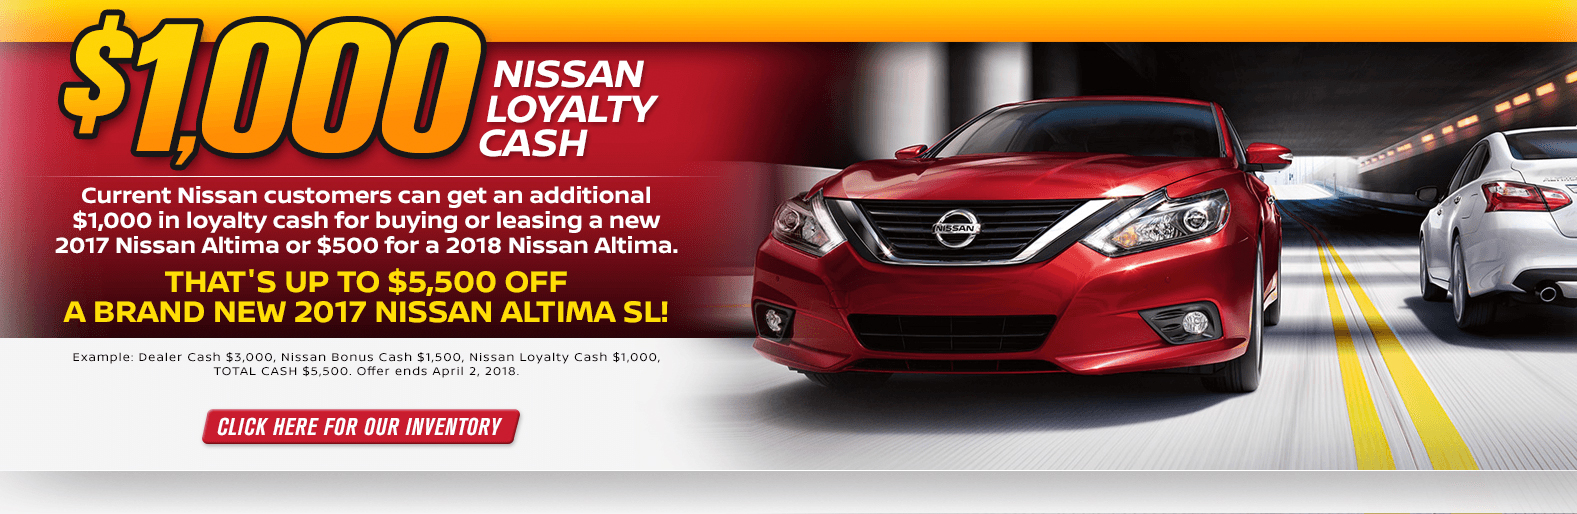 Don t Miss Out On The 1 000 Nissan Loyalty Cash At Passport Nissan MD 